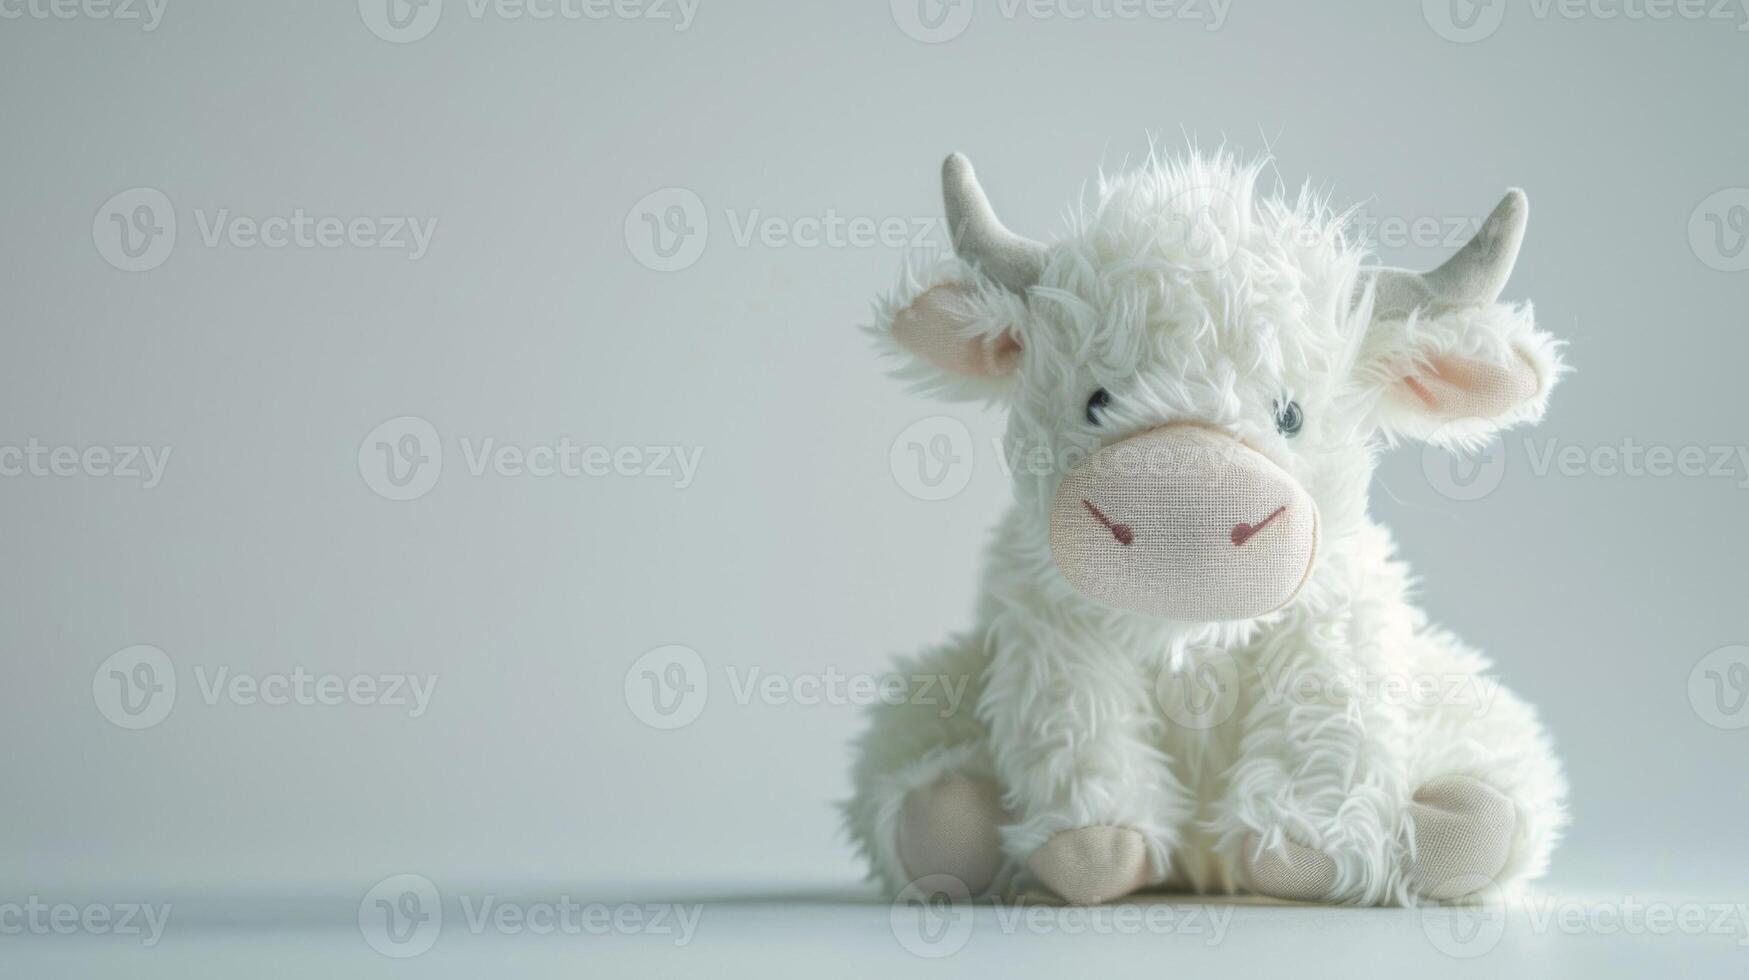 Cute fluffy white cow plush toy sitting on pastel background photo